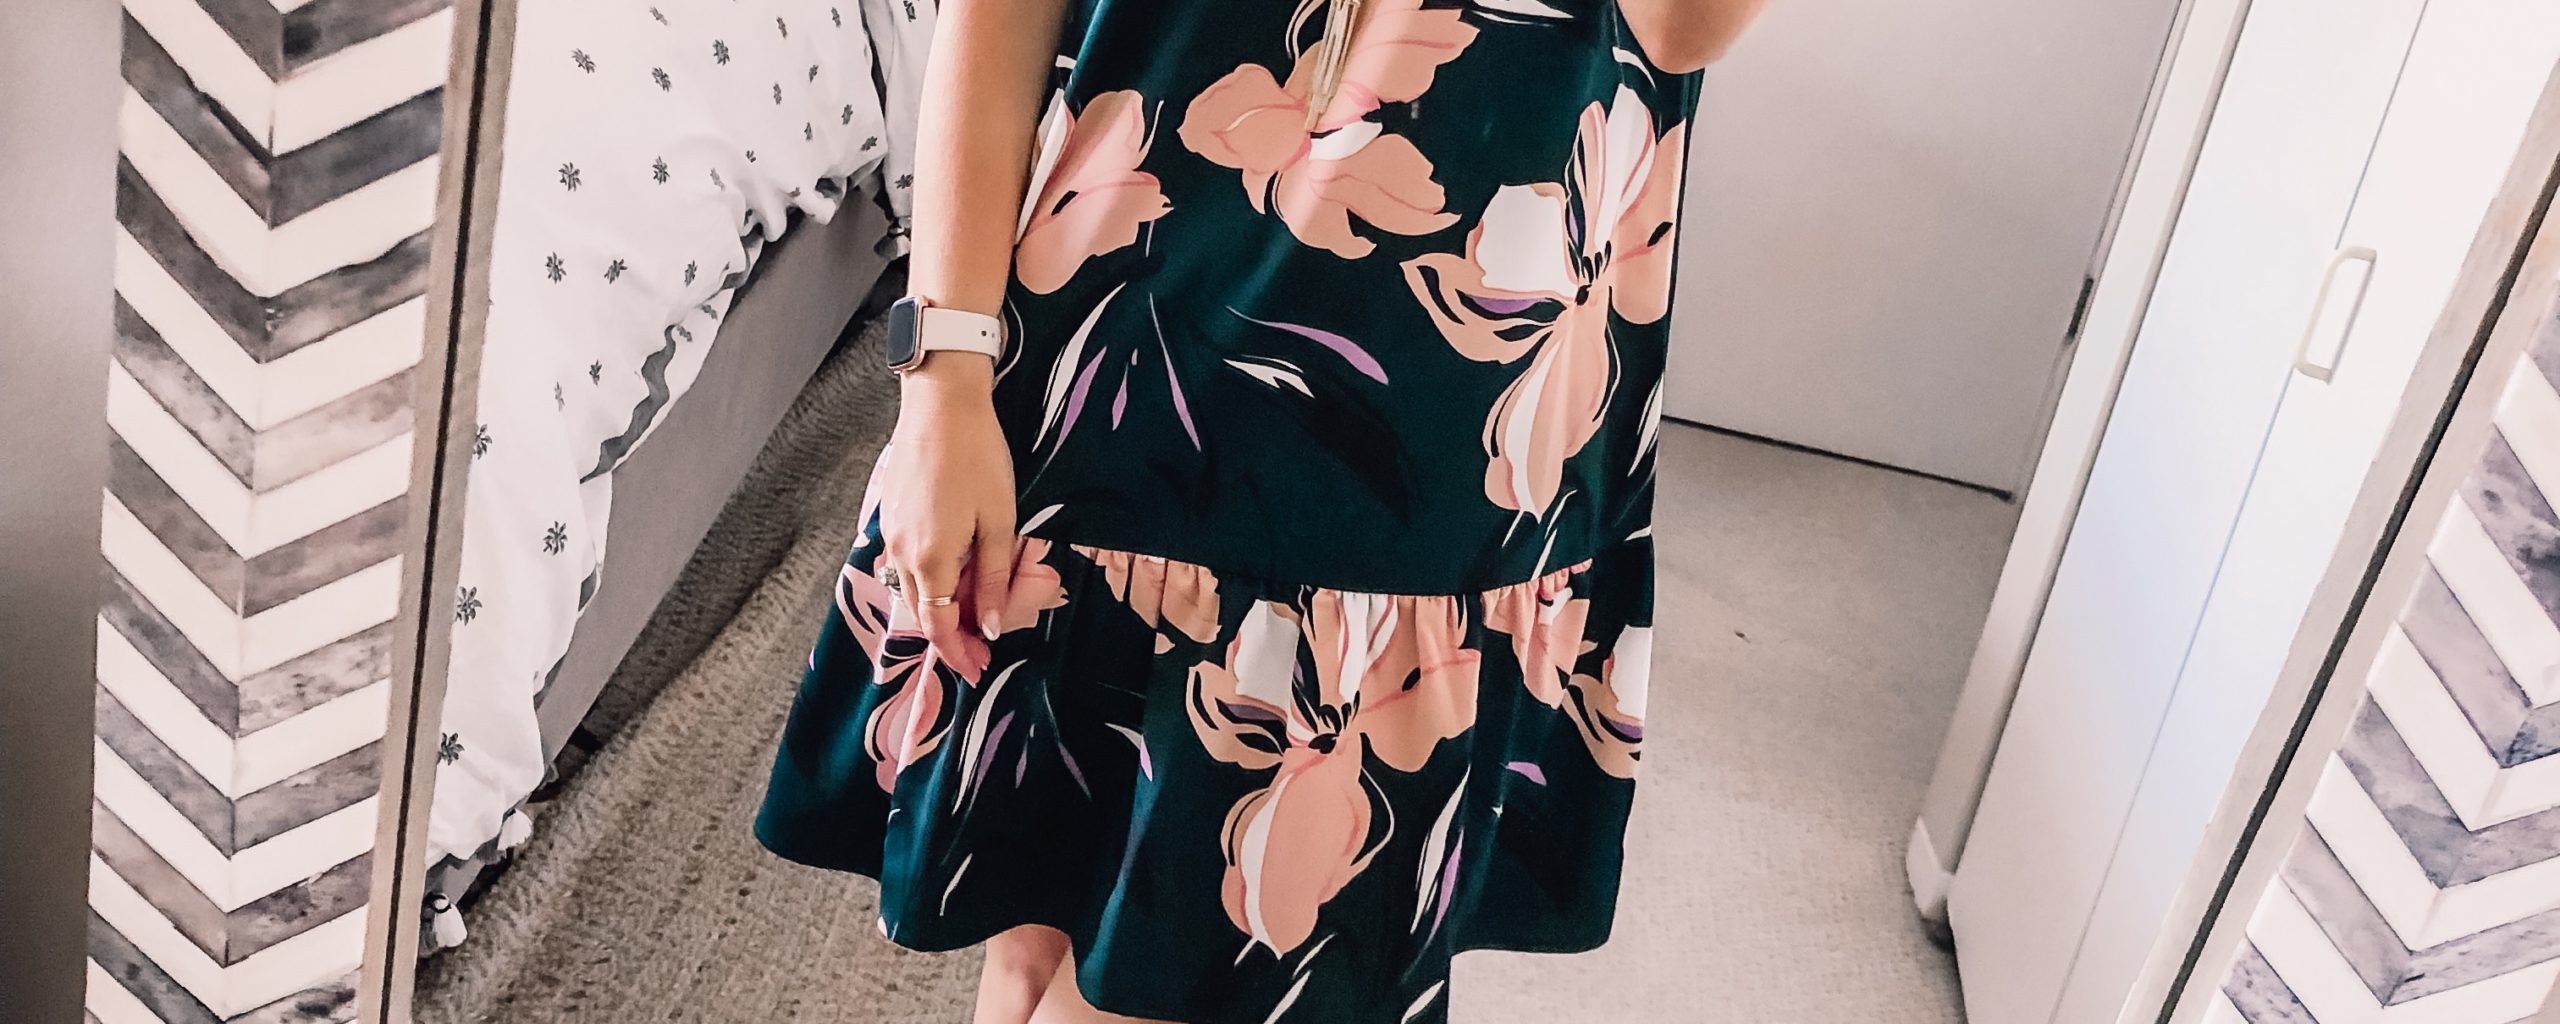 halogen floral print ruffle hem shift dress from the nordstrom anniversary sale